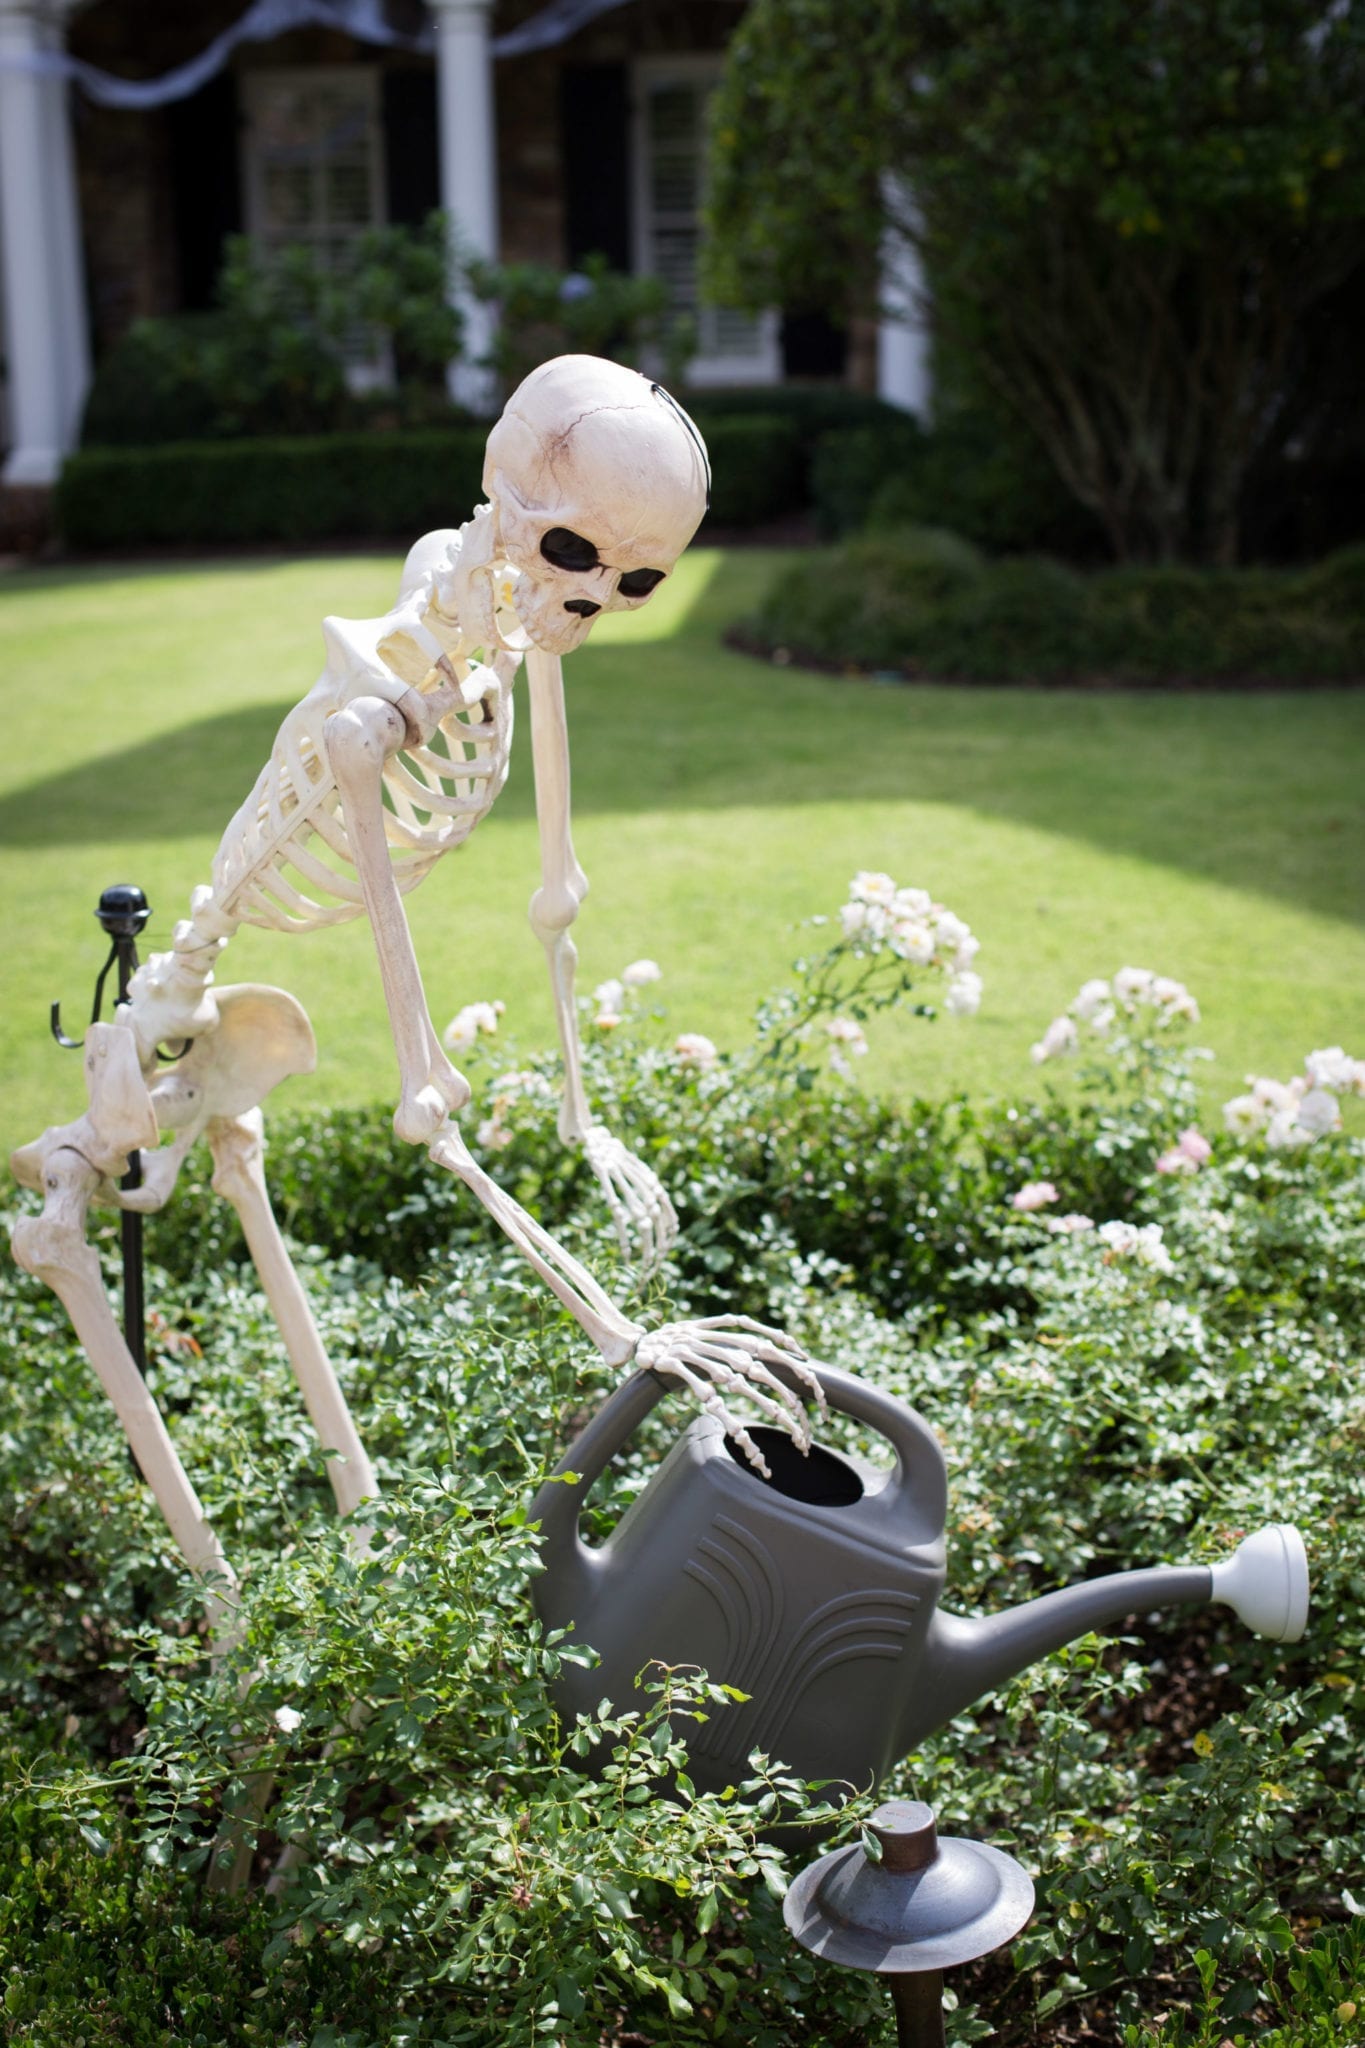 Funny ways to set up skeletons for Halloween